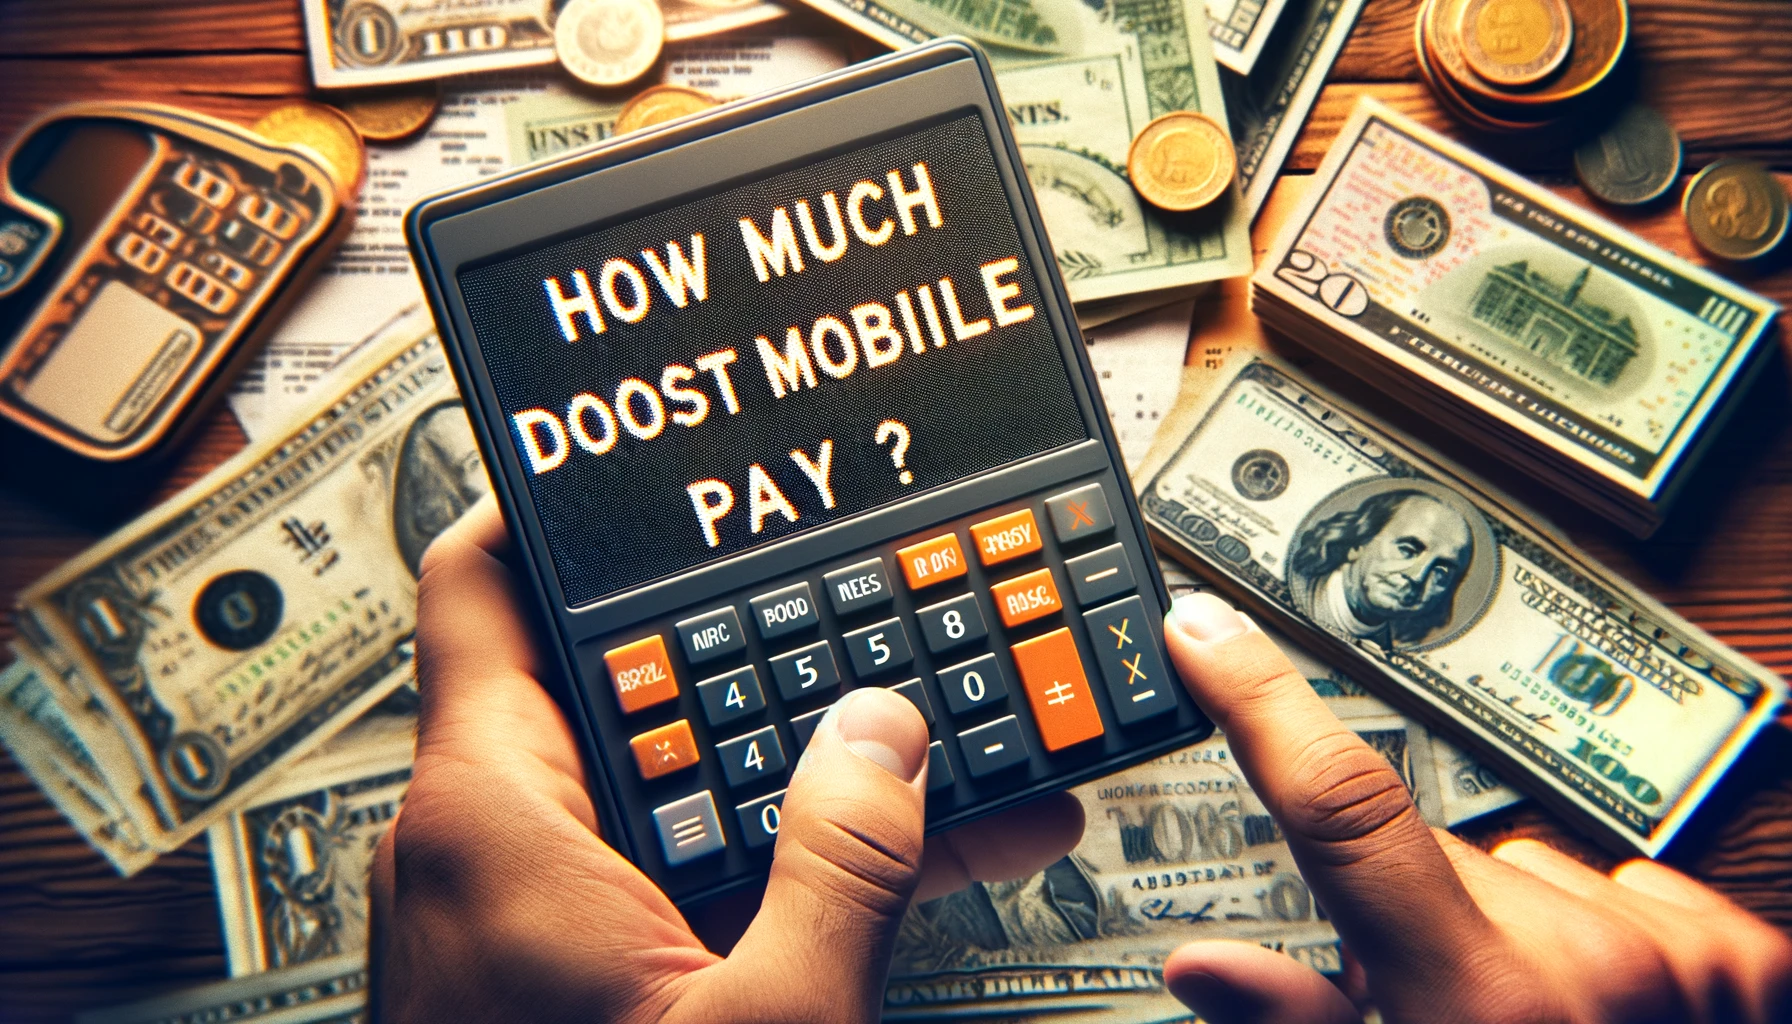 How Much Does Boost Mobile Pay